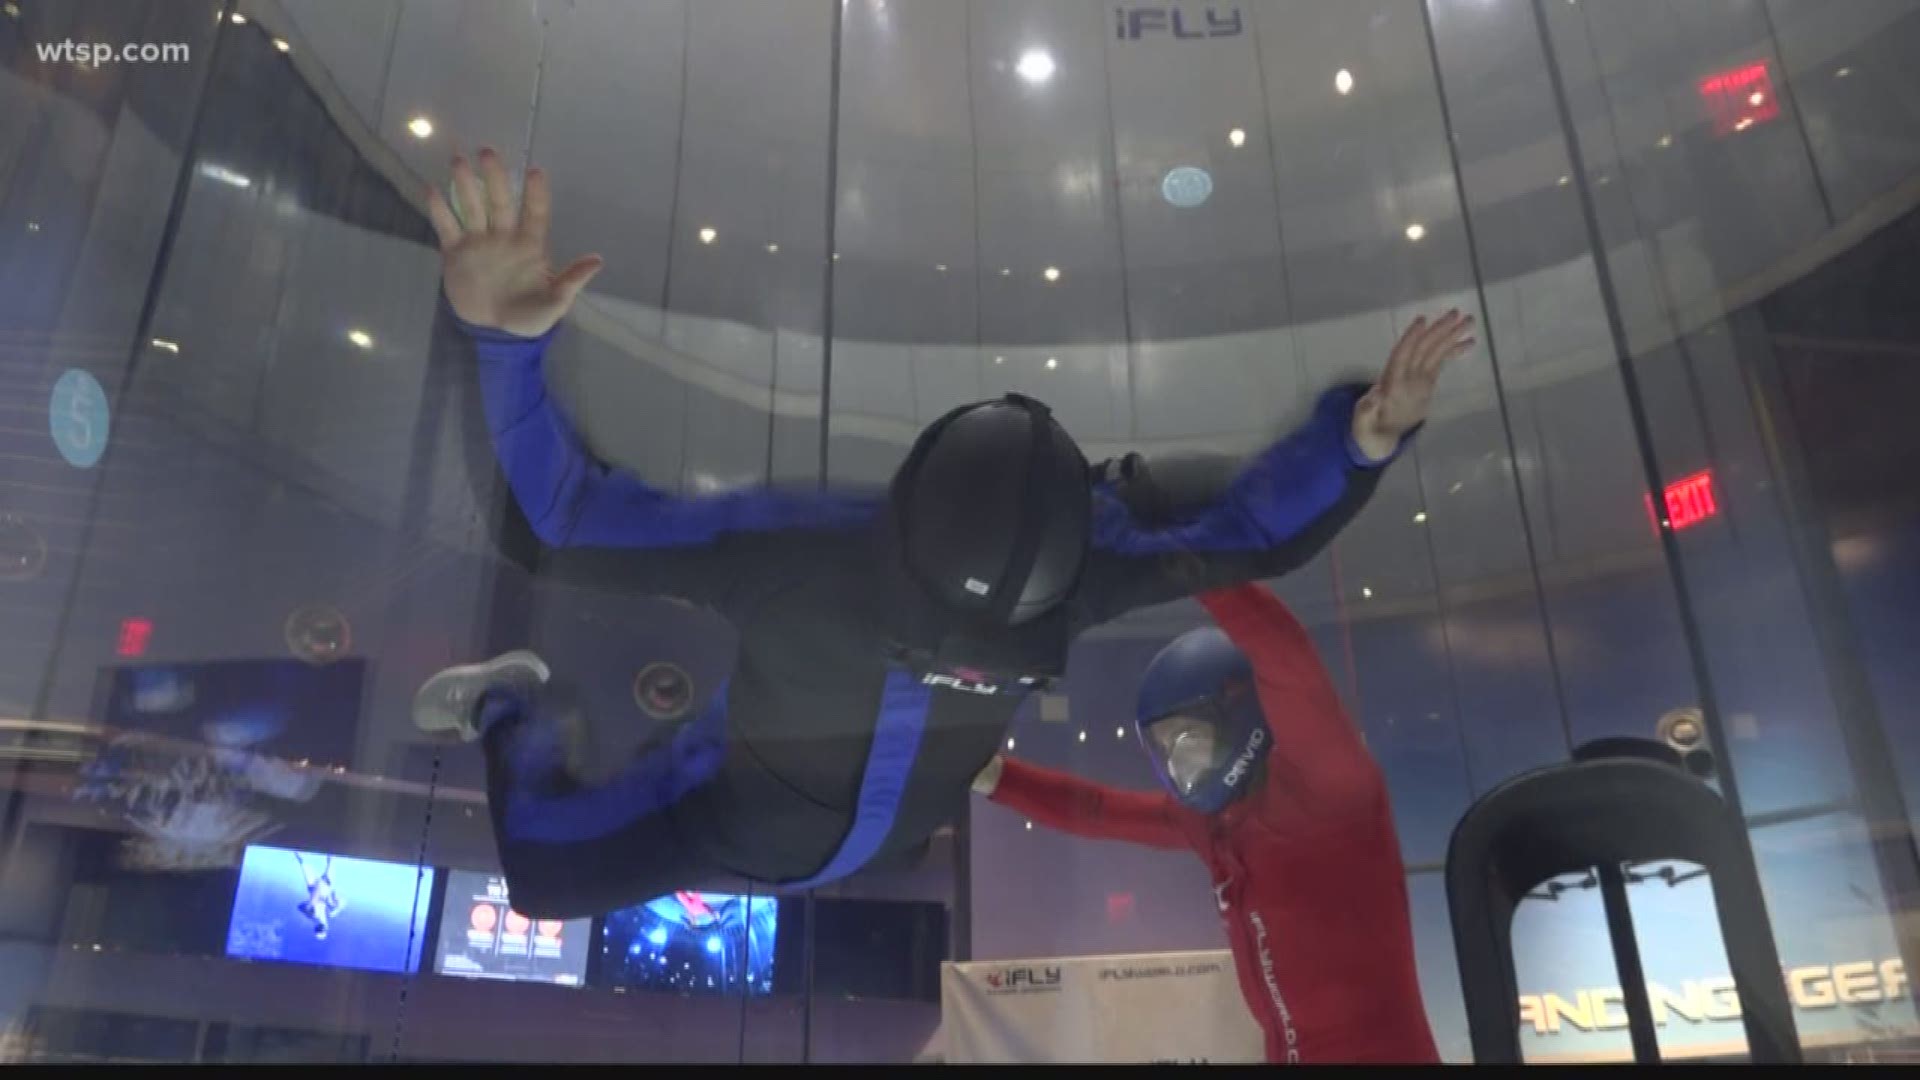 iFLY is located at 10654 Palm River Road in Tampa.